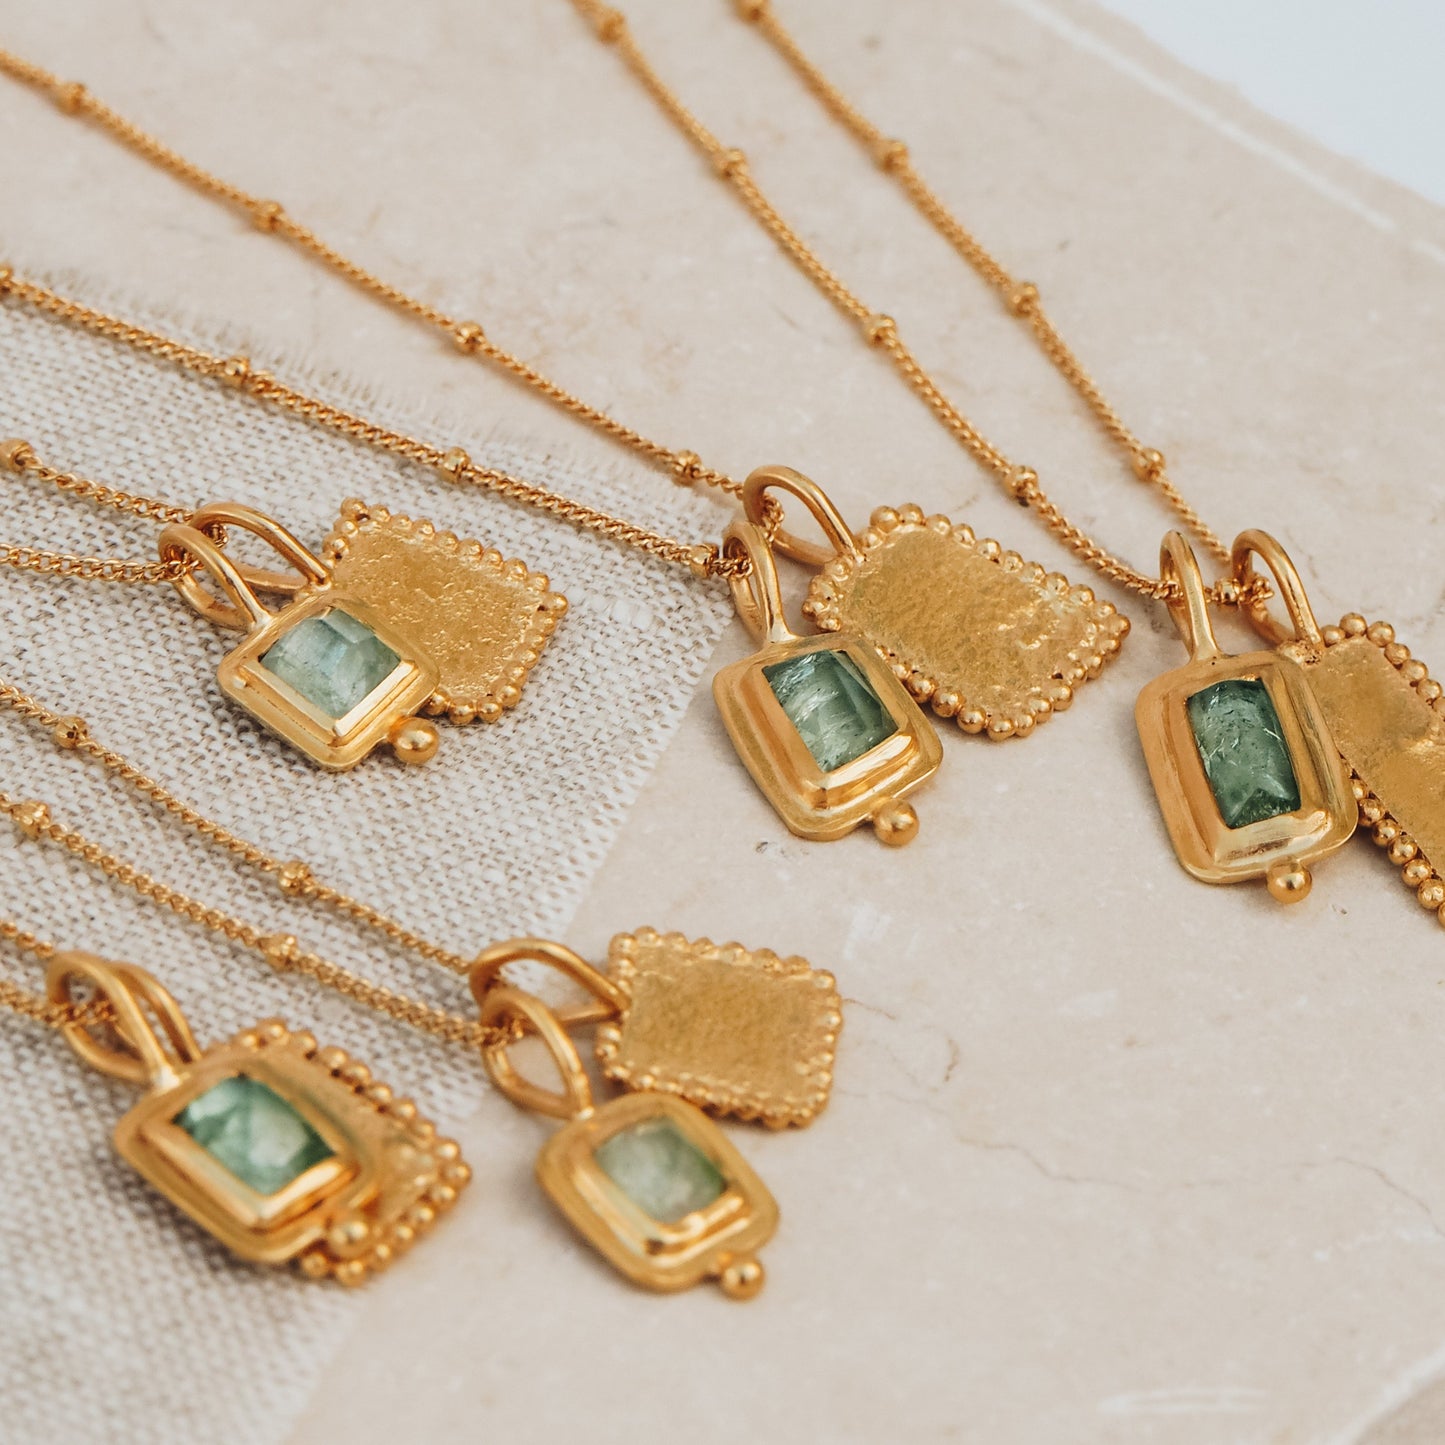 Handcrafted gold necklaces showcasing square pendants embellished with enchanting ocean blue rose cut tourmaline gemstones, textured surfaces, and intricate granulation details, creating a truly unique and captivating look.